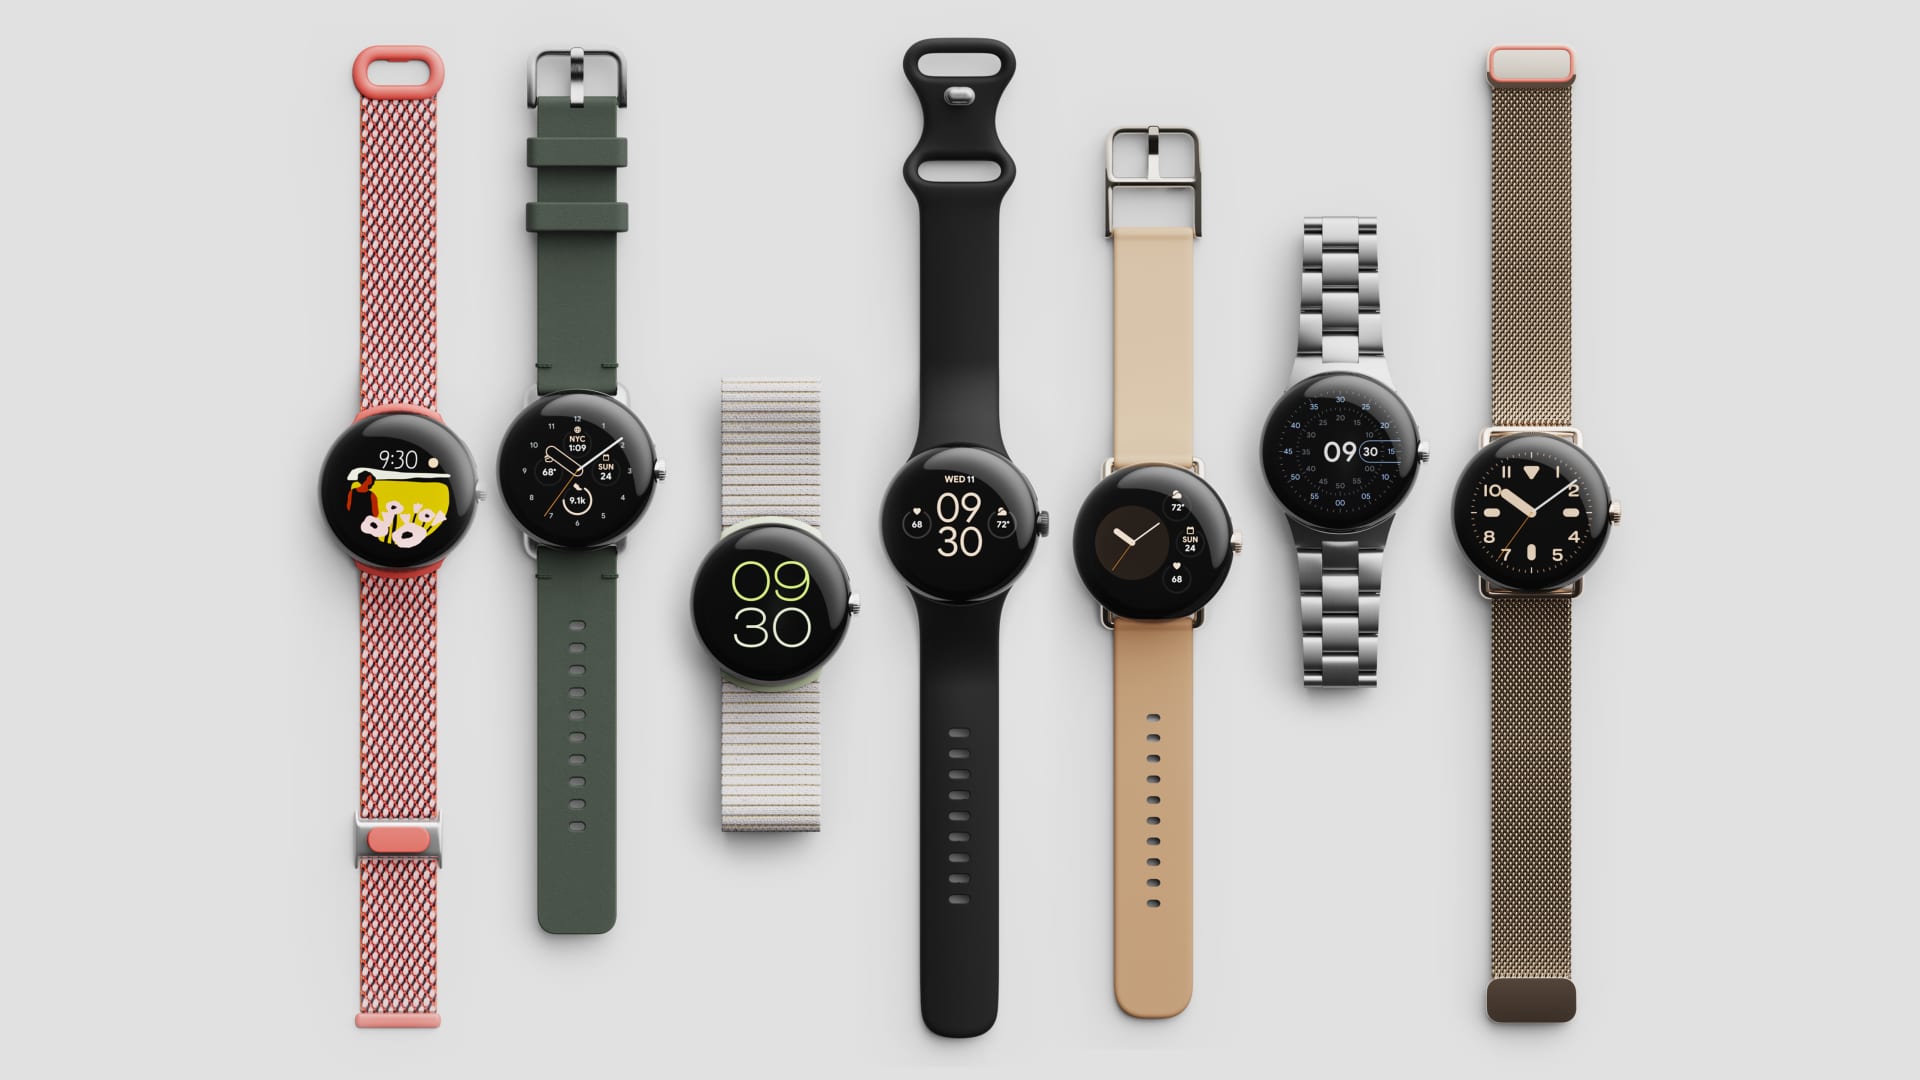 Google unveils new flagship Pixel phones and its first smartwatch, which has Fit..